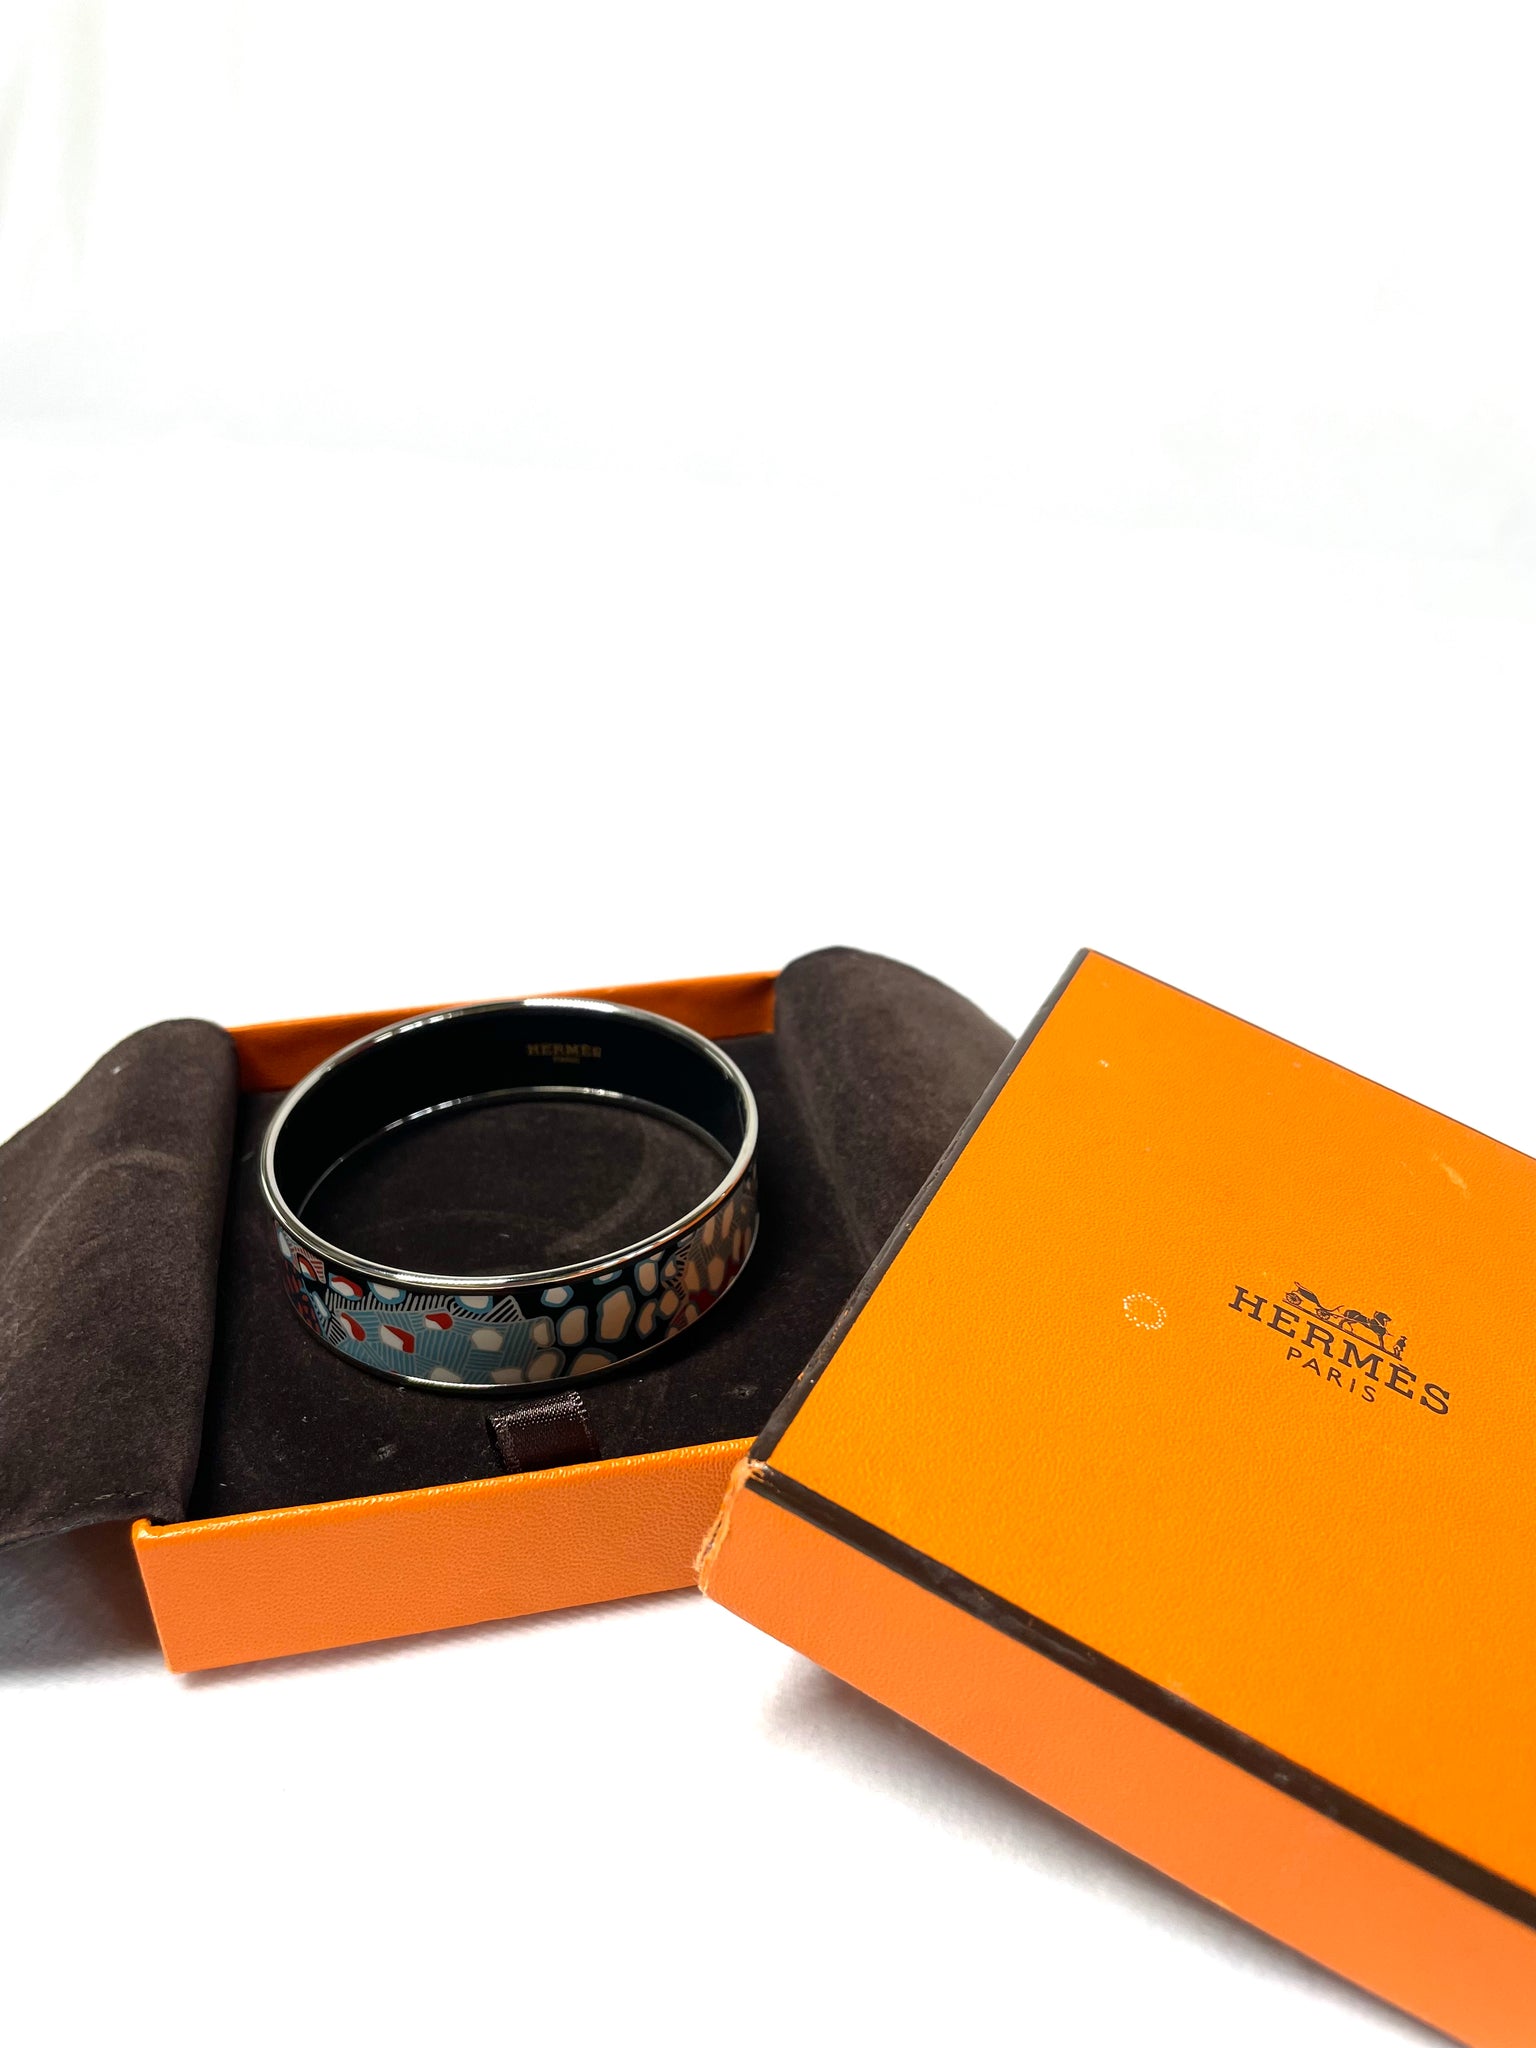 Pre Loved Hermes Animal Print Bangle in Silver available at UniKoncept in Waterloo